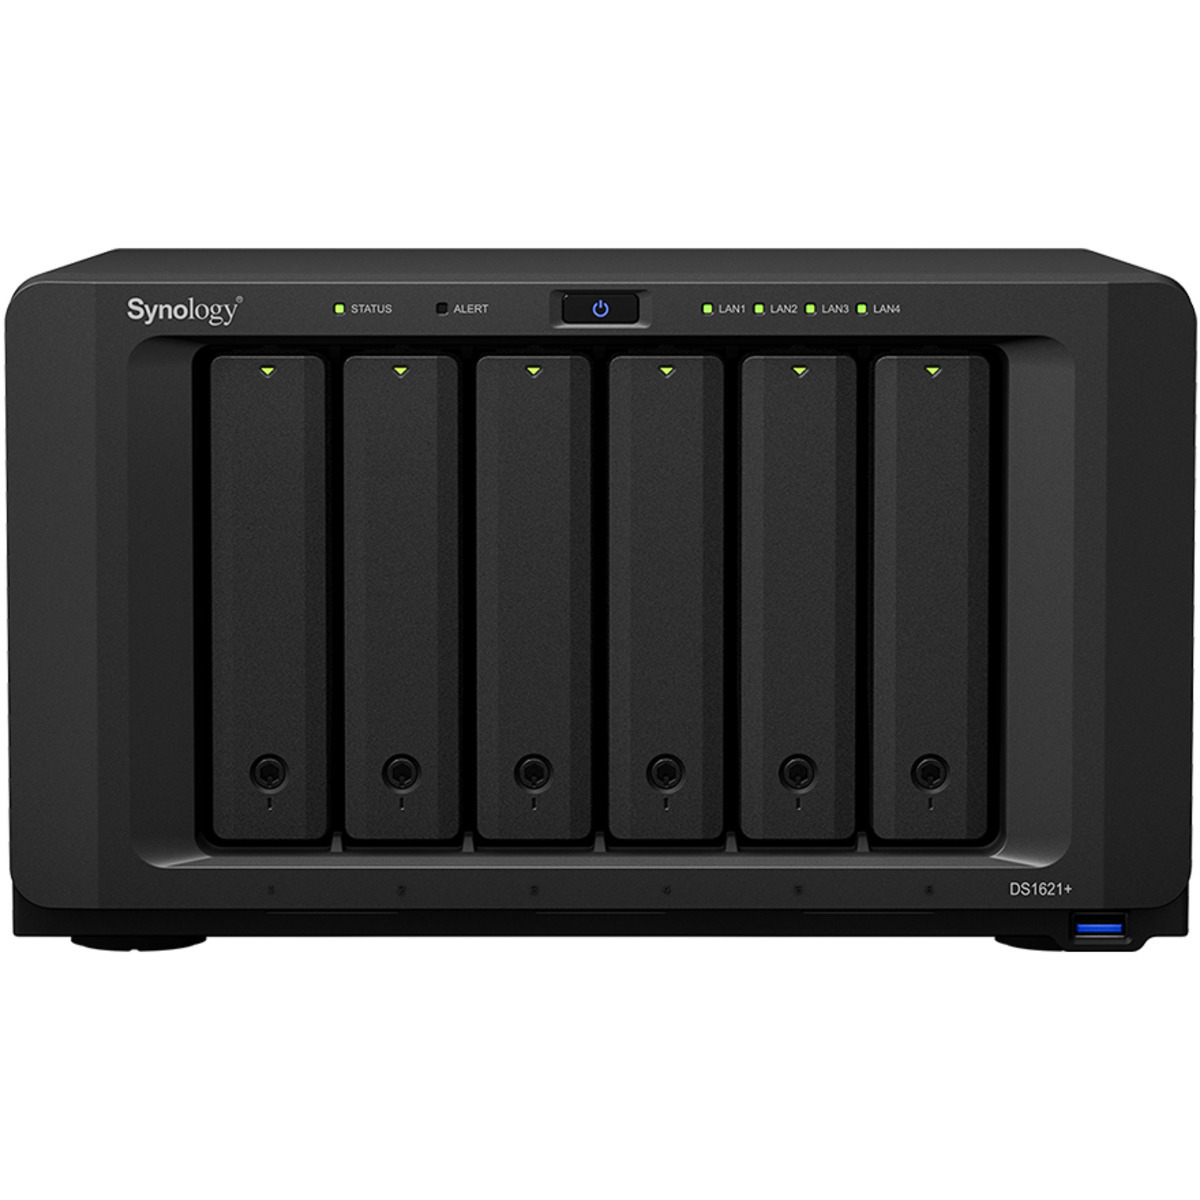 Synology DiskStation DS1621+ 48tb 6-Bay Desktop Multimedia / Power User / Business NAS - Network Attached Storage Device 4x12tb Western Digital Red Pro WD121KFBX 3.5 7200rpm SATA 6Gb/s HDD NAS Class Drives Installed - Burn-In Tested - FREE RAM UPGRADE DiskStation DS1621+